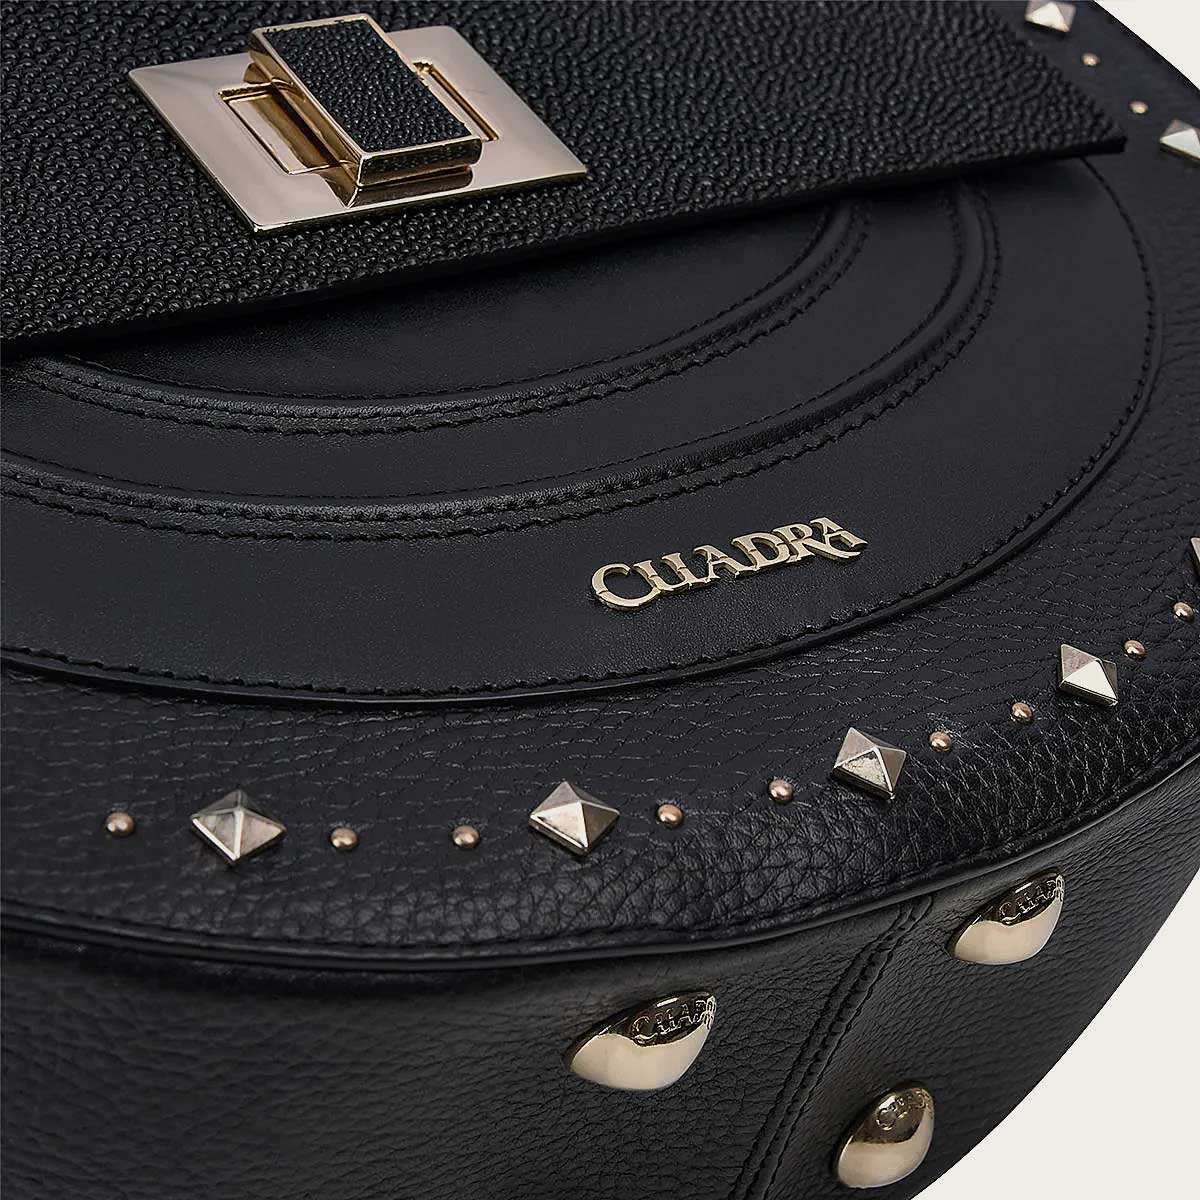 The top of the bag has a secure closure carefully designed with a metal clasp that includes a stingray leather appliqué and magnet application,